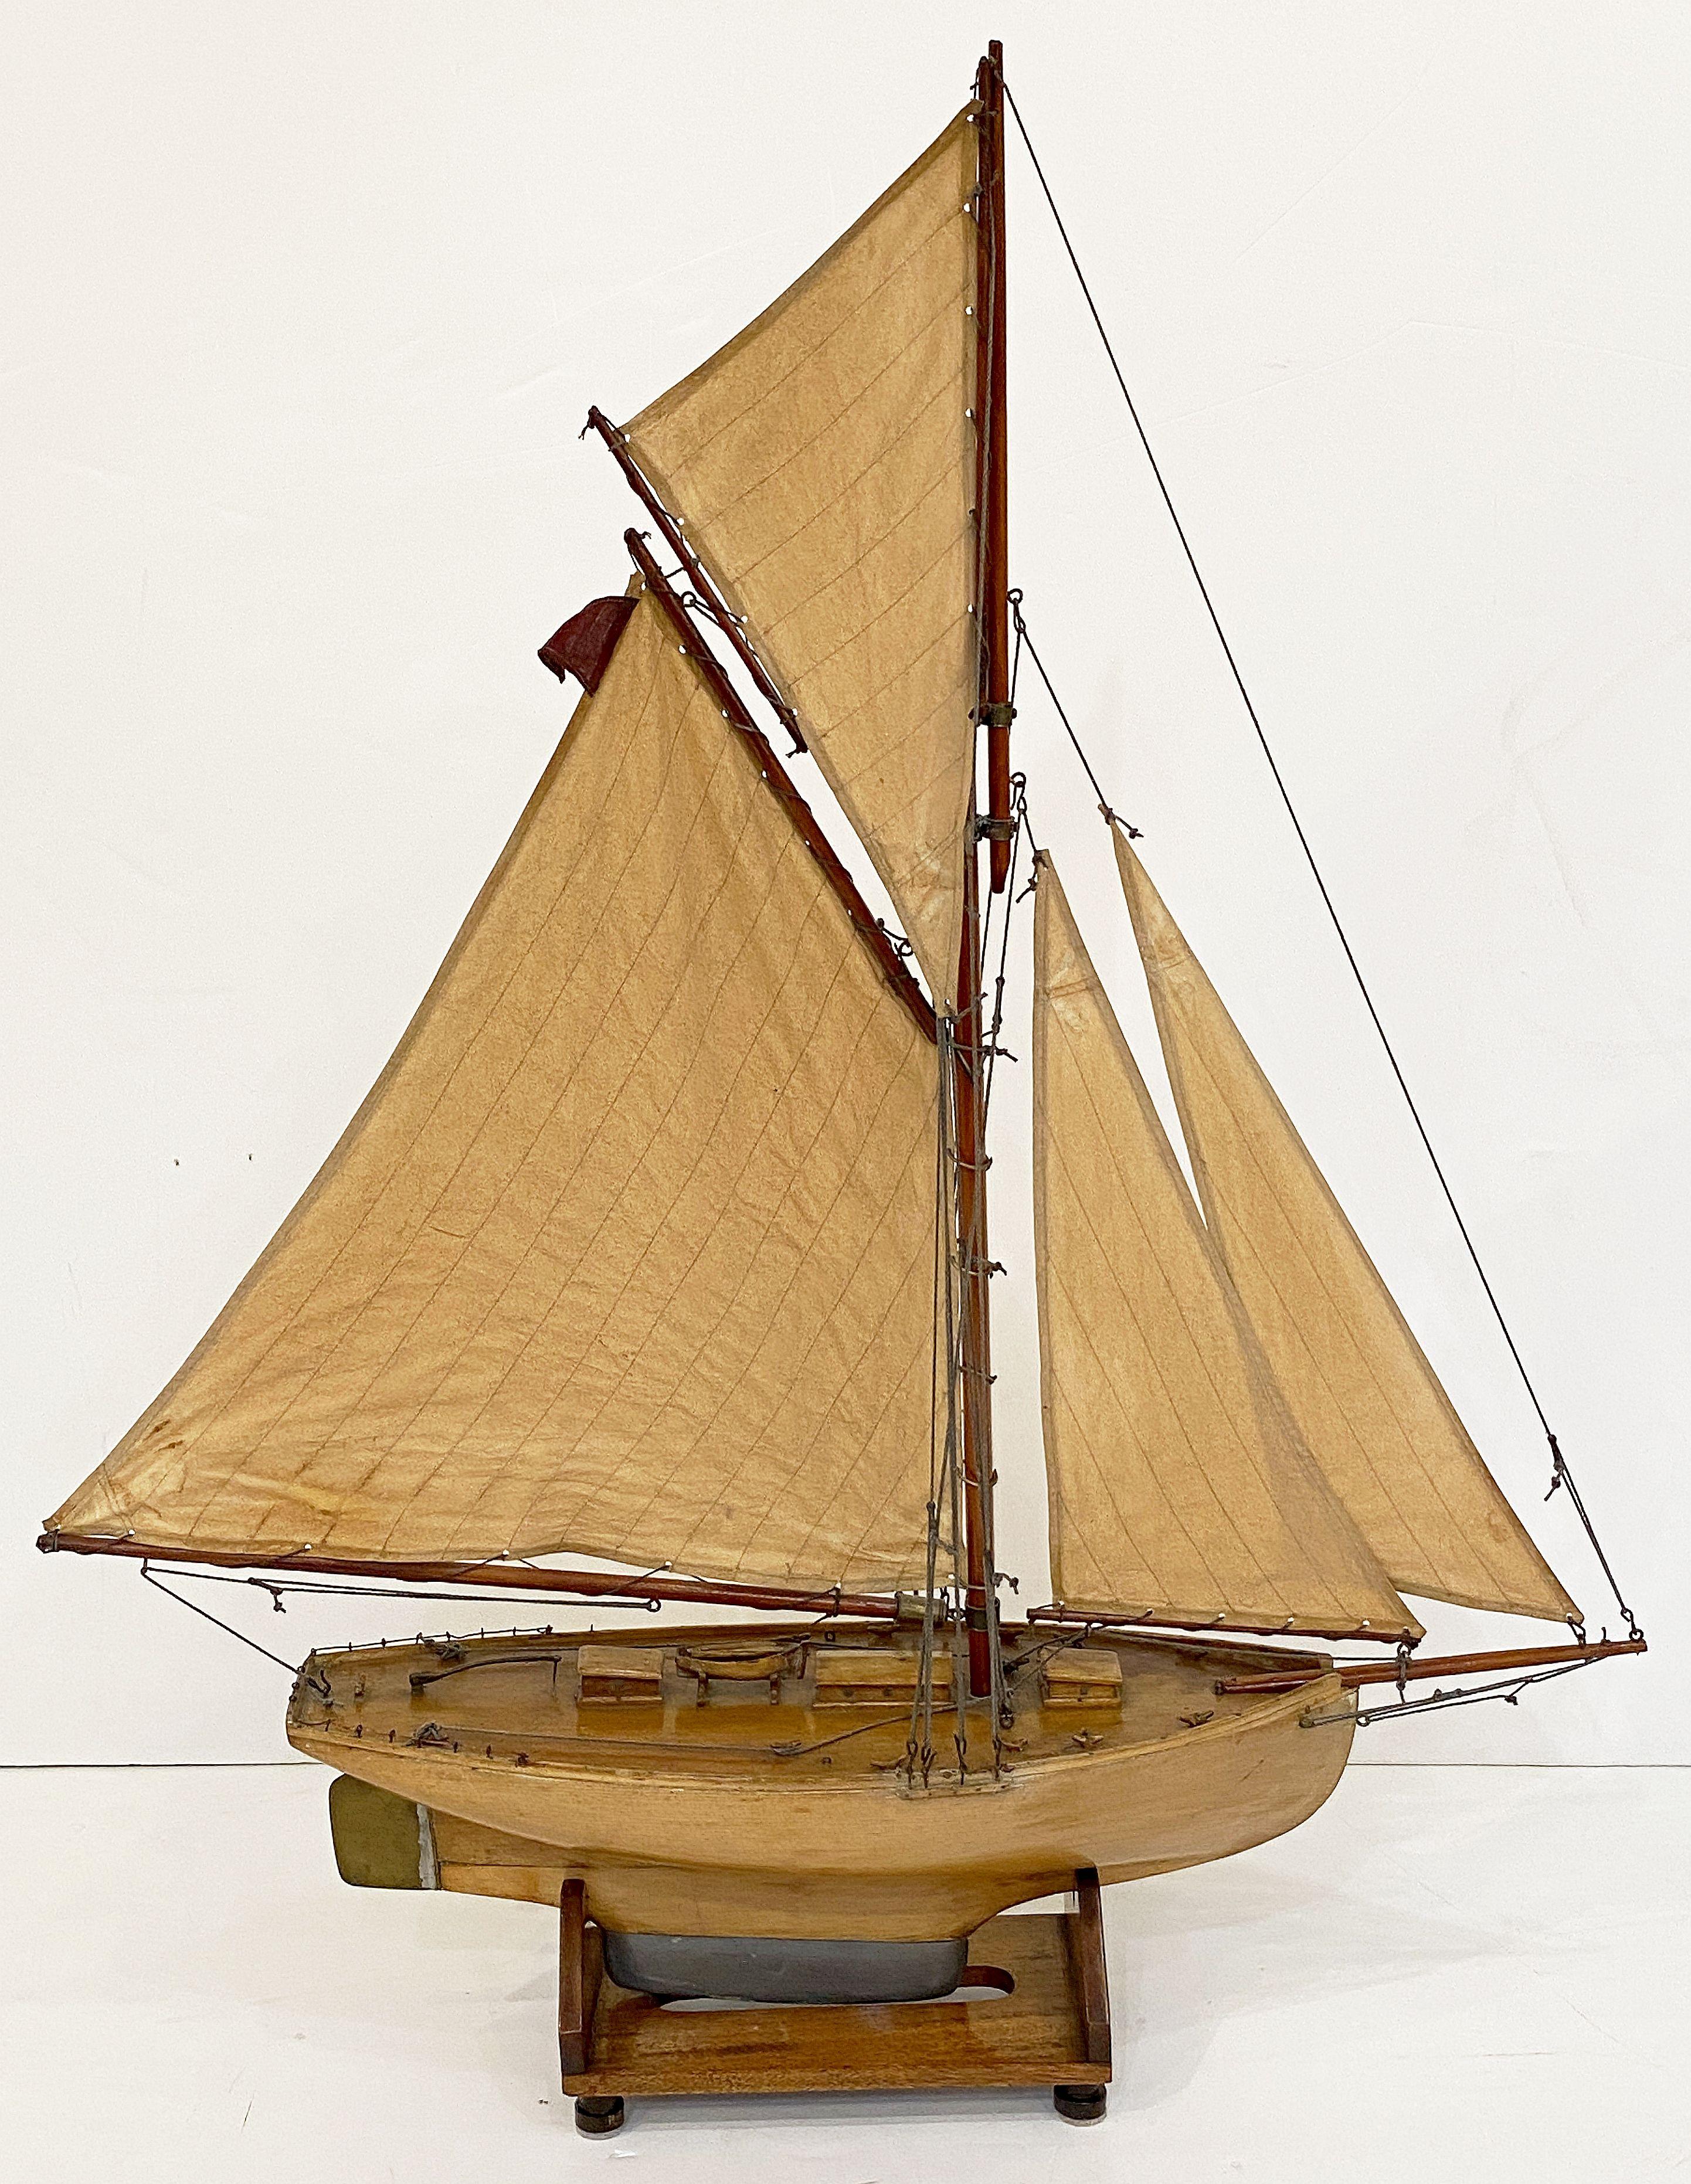 A handsome English pond yacht from the Edwardian era, handcrafted from wood and brass and featuring vintage cloth sails and fittings.

Displayed on a separate, custom-fitted stand.

Height and depth includes the stand.

Dimensions: H 41 1/2